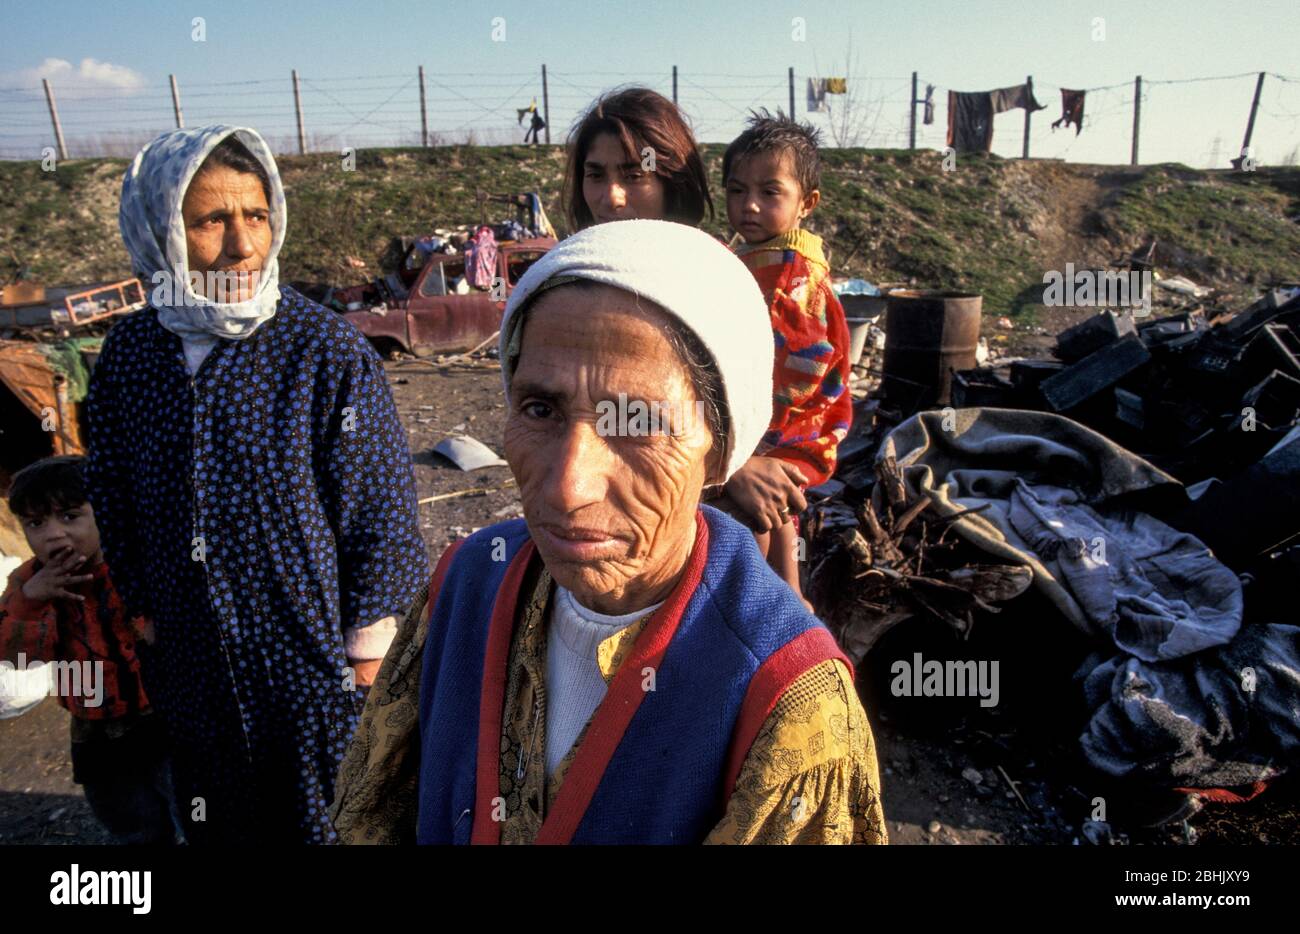 Roma family living in squalid conditions at the Vardarishte landfill site by the Vardar river in Skopje, Macedonia. The Roma have built shacks by the dump and rummage through the waste in which they live in, sometimes finding plastic or metal they can sell. Stock Photo